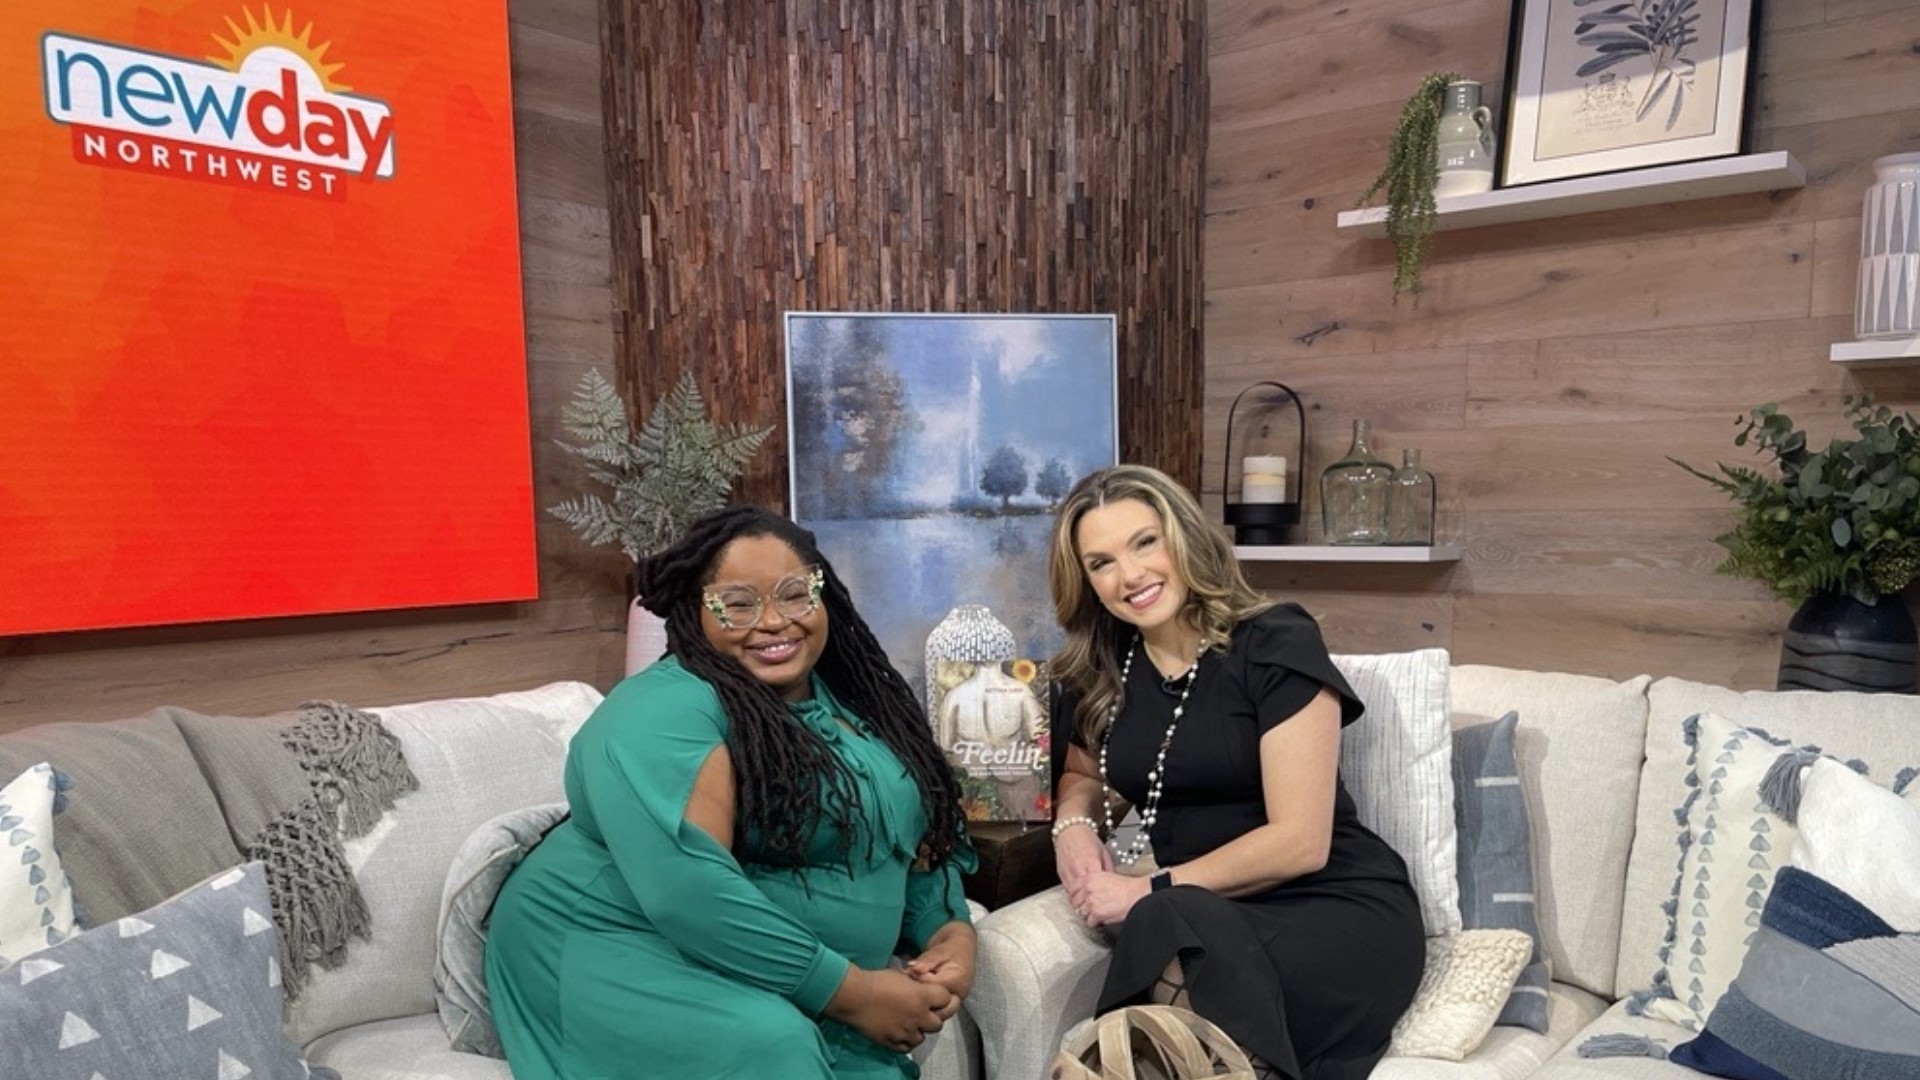 Dr. Bettina Judd, author of "Feelin: Creative Practice, Pleasure, and Black Feminist Thought" joined the show to chat about her new book. #newdaynw